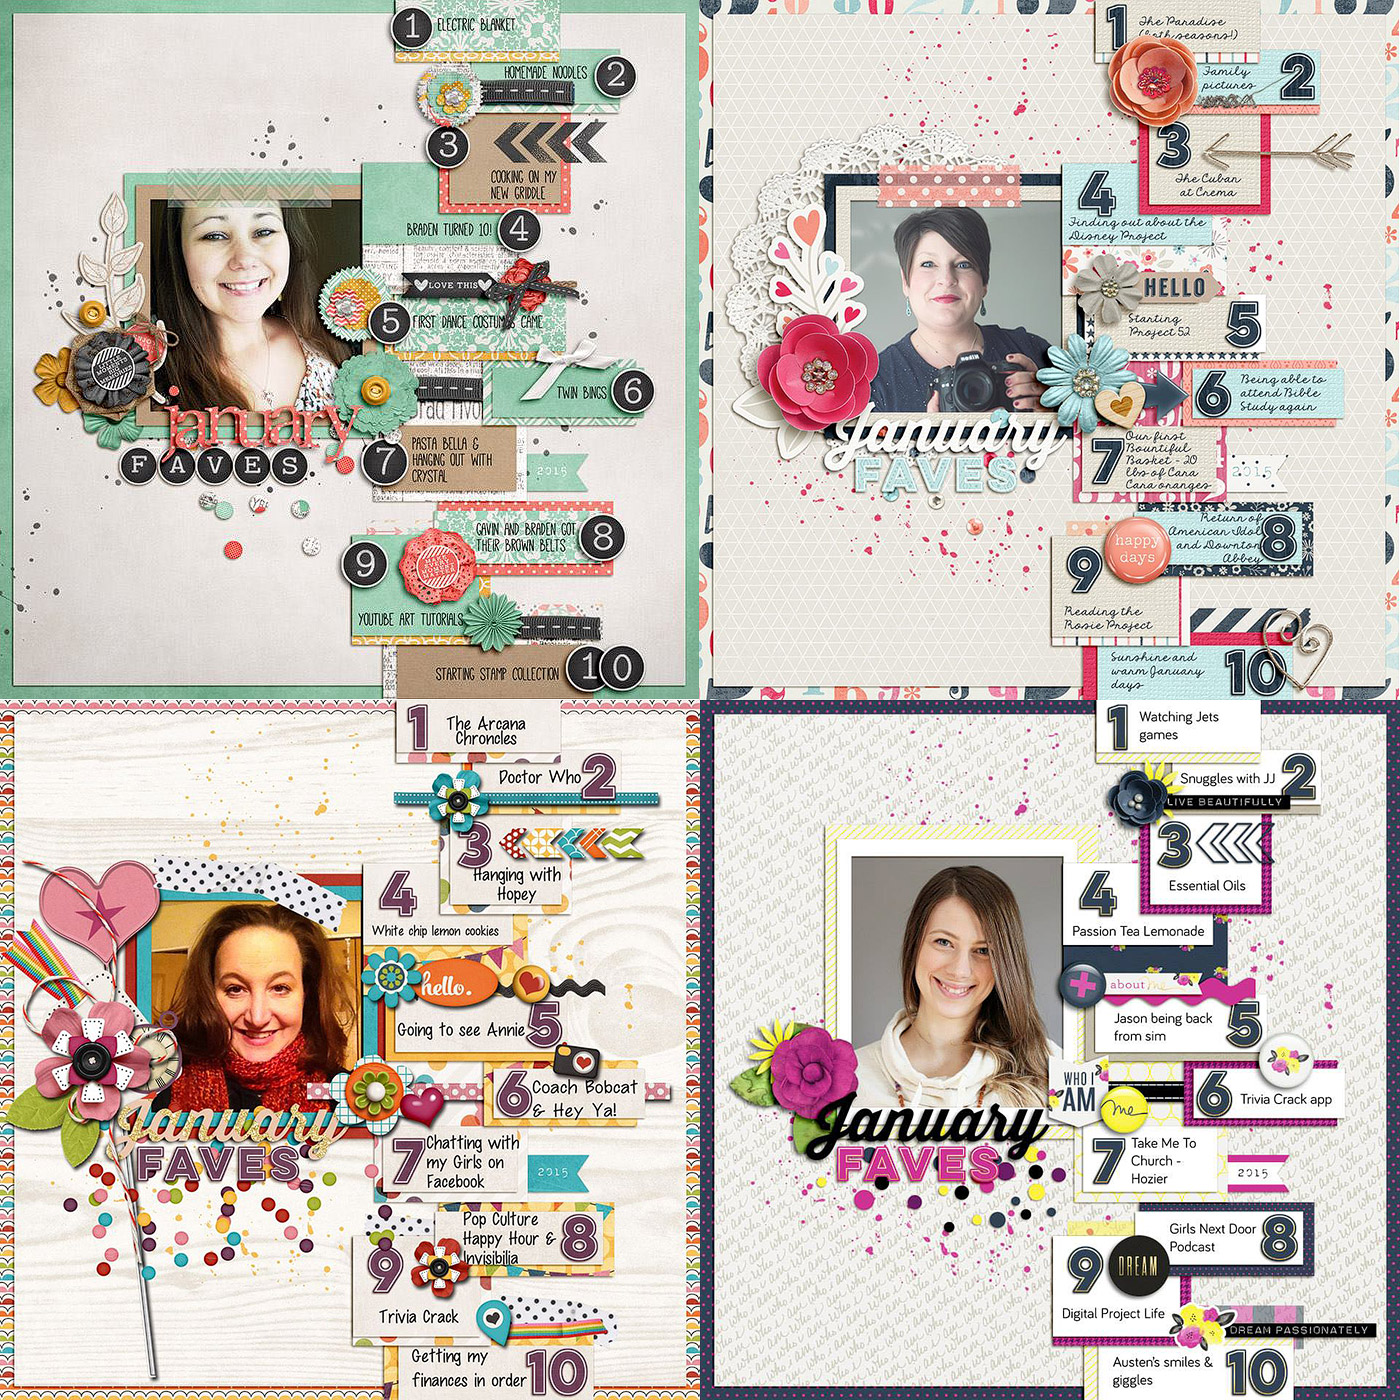 The Faves Project: January Faves | via NettioDesigns